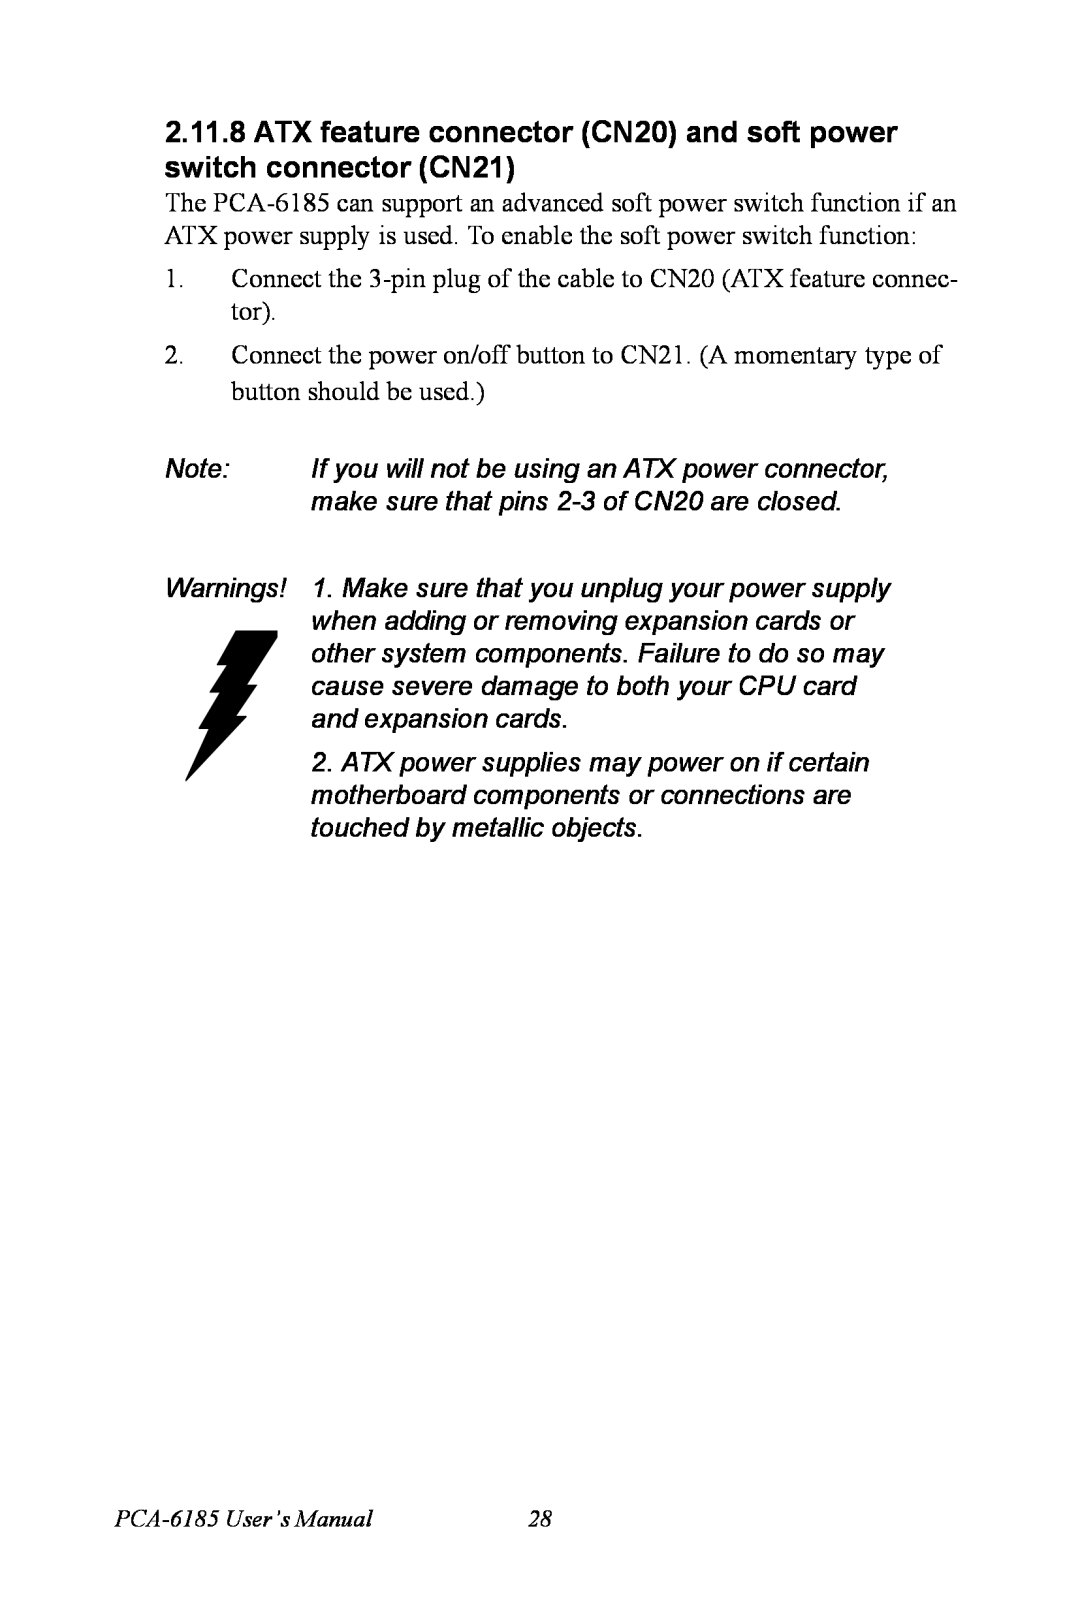 Advantech PCA-6185 user manual If you will not be using an ATX power connector 